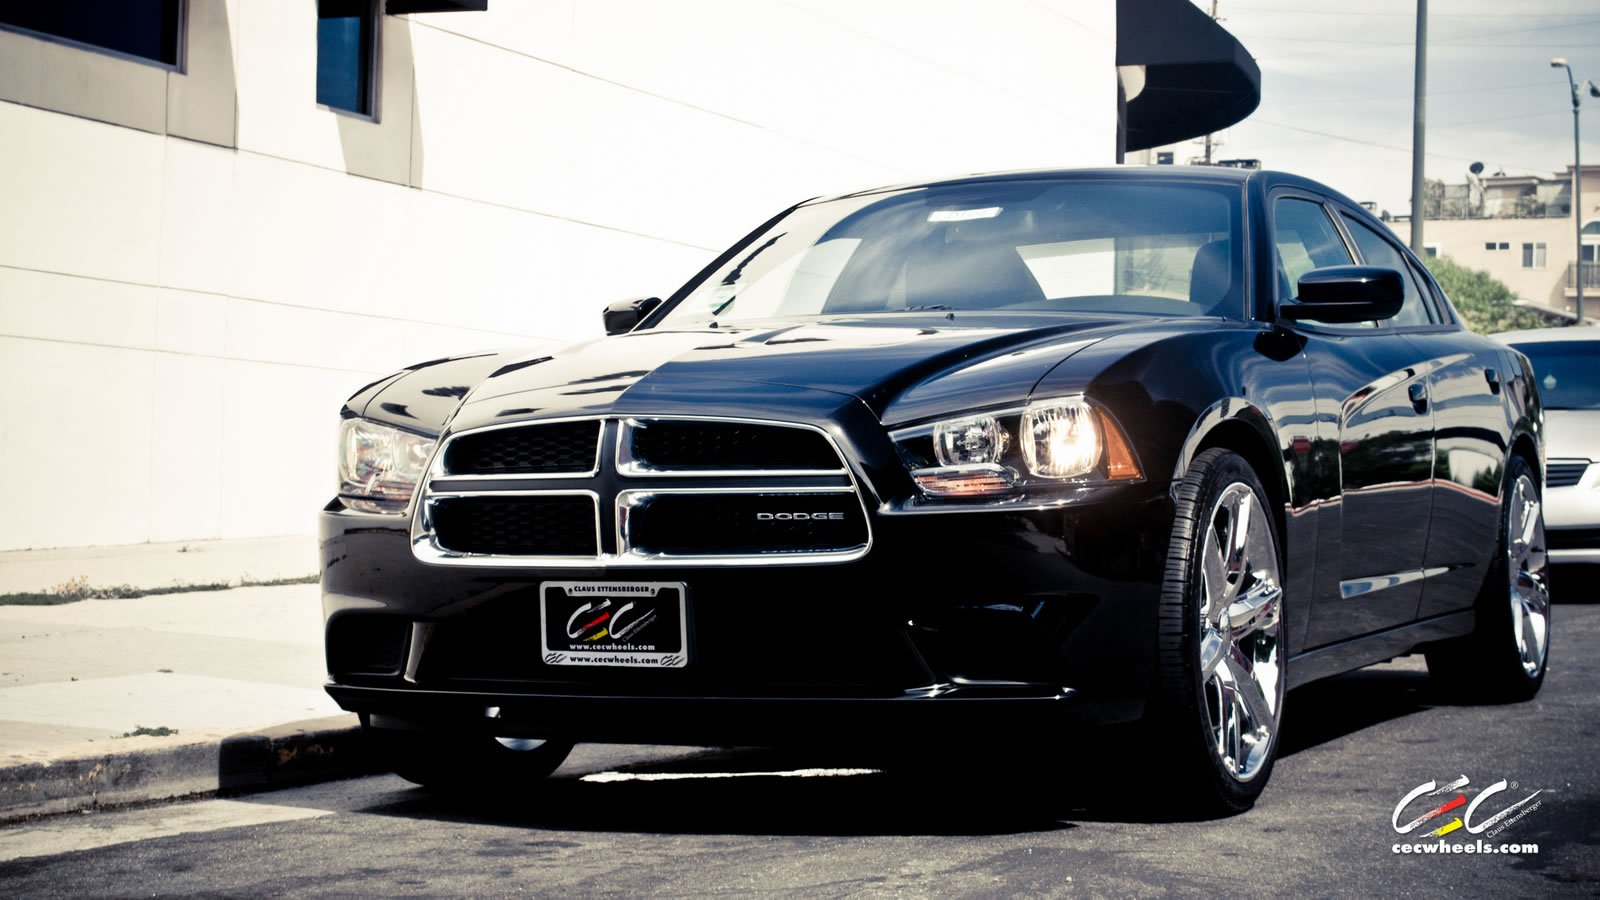 2015, Cars, Cec, Tuning, Wheels, Dodge, Charger Wallpaper